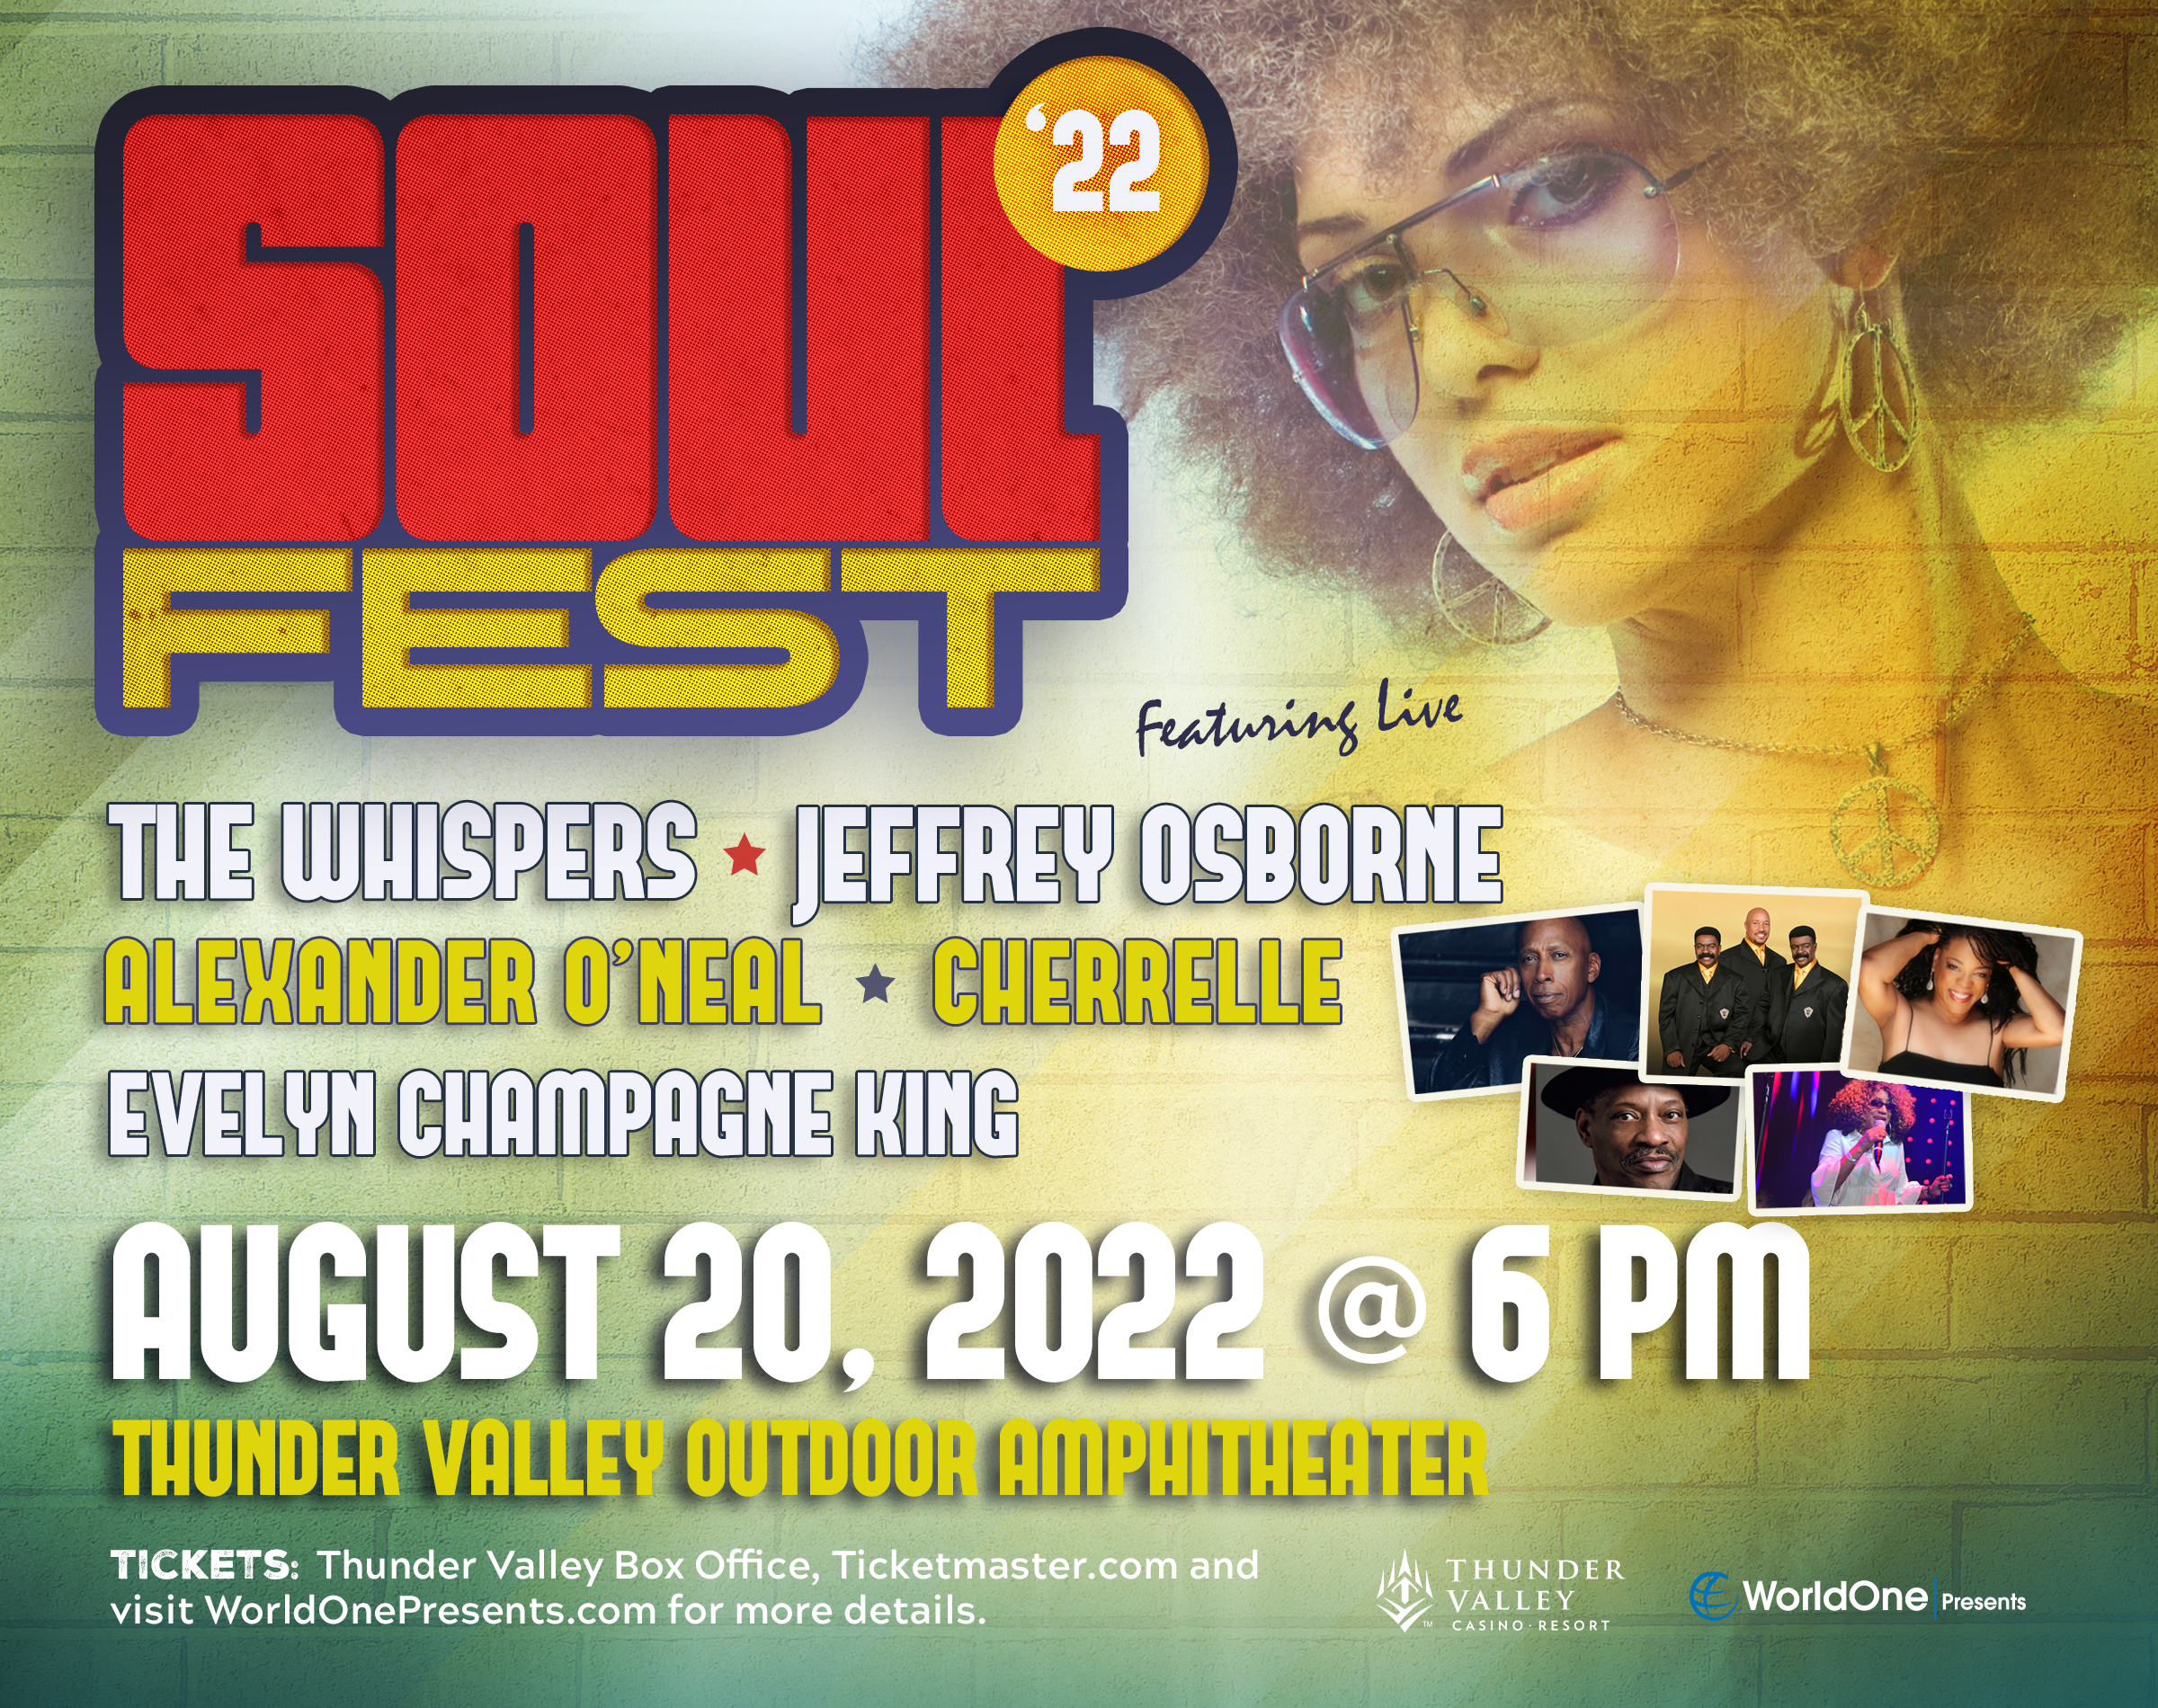 SoulFest22 NEW